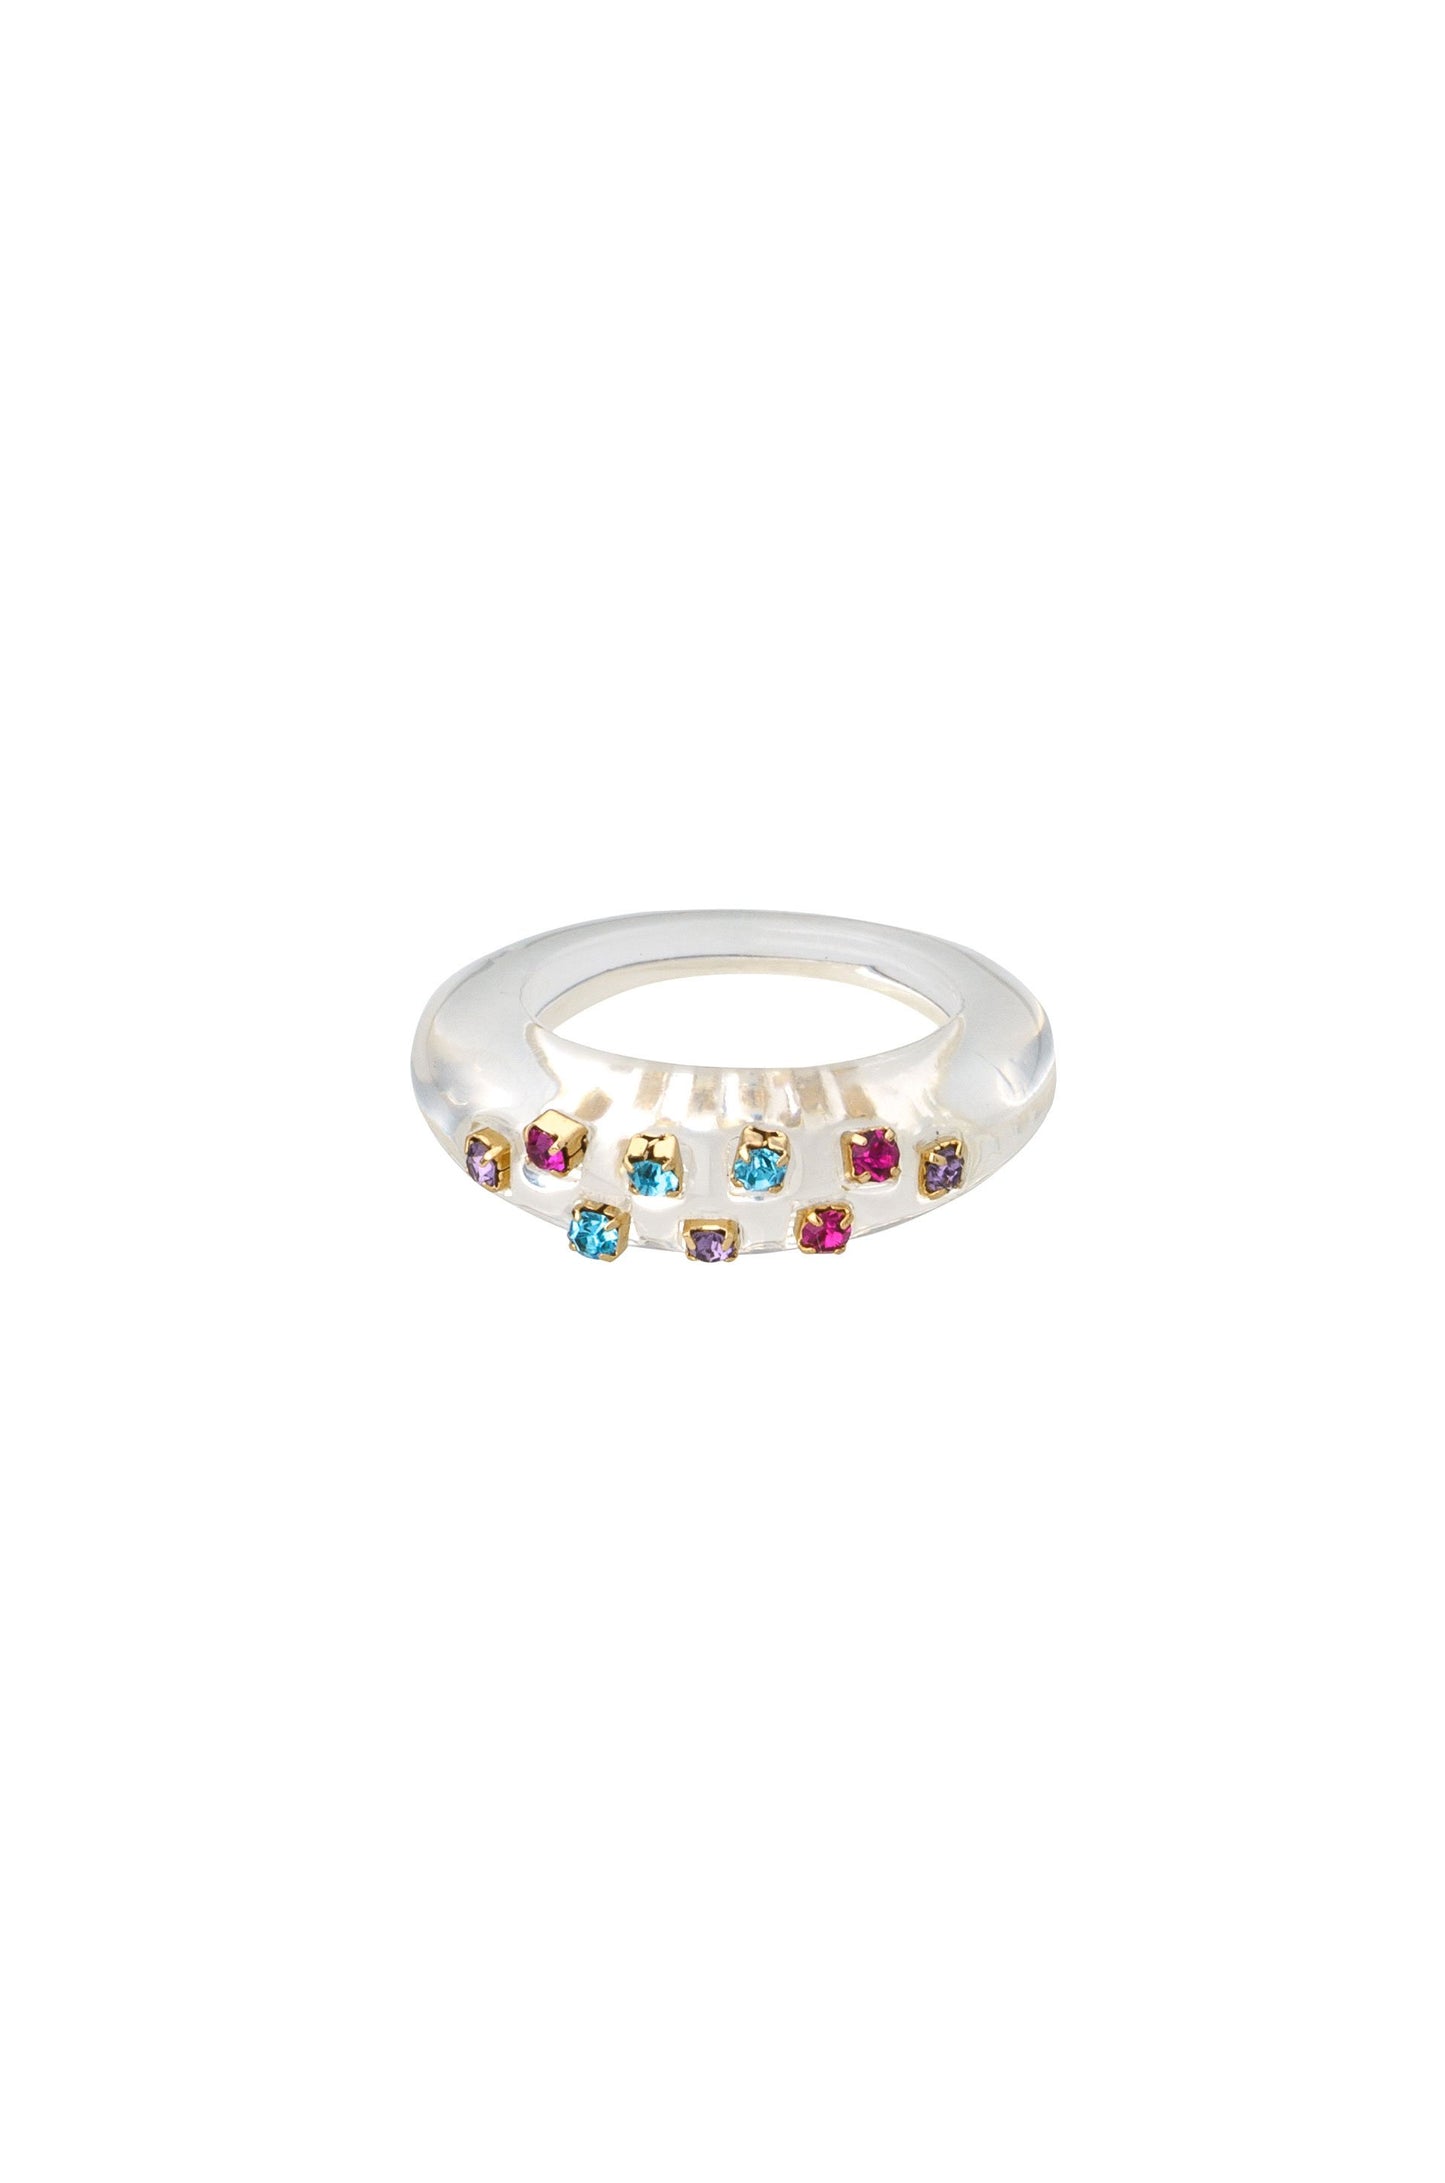 Crowd Pleaser 18k Gold Plated Clear Resin Ring with Multi Colored Rhinestones